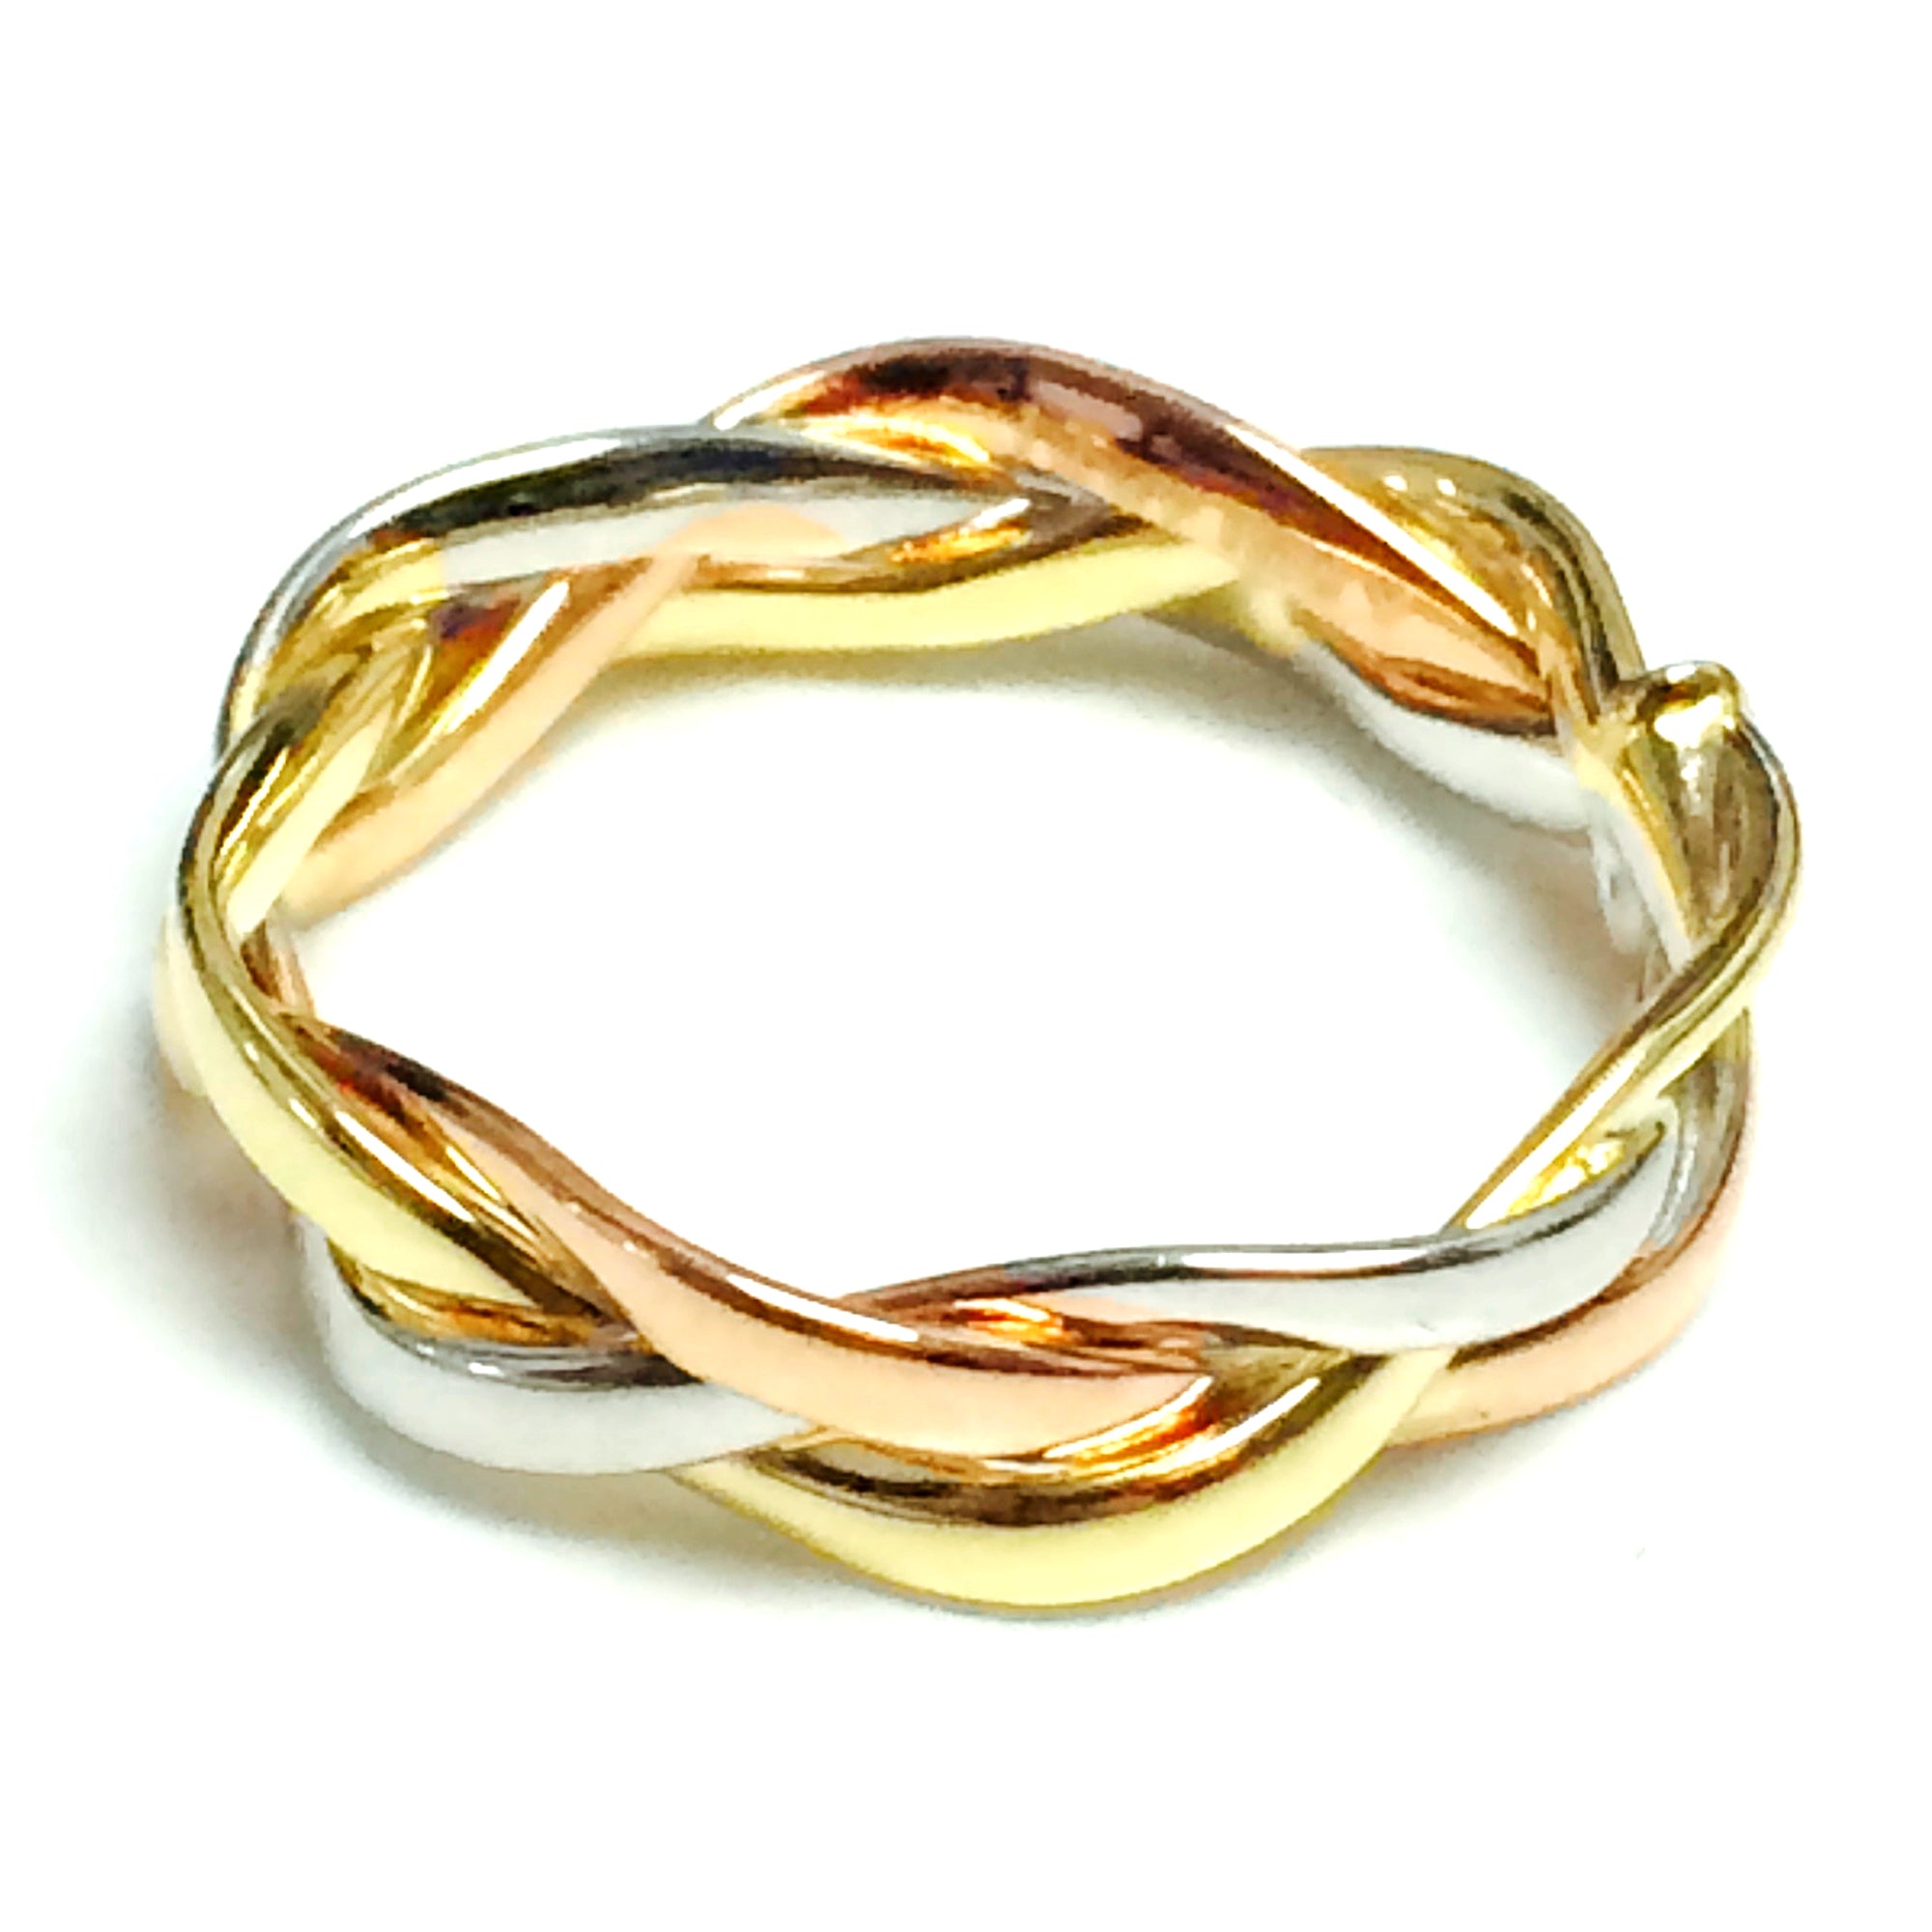 14K Tri-Color Gold Intertwined Braided Ring, 5mm fine designer jewelry for men and women